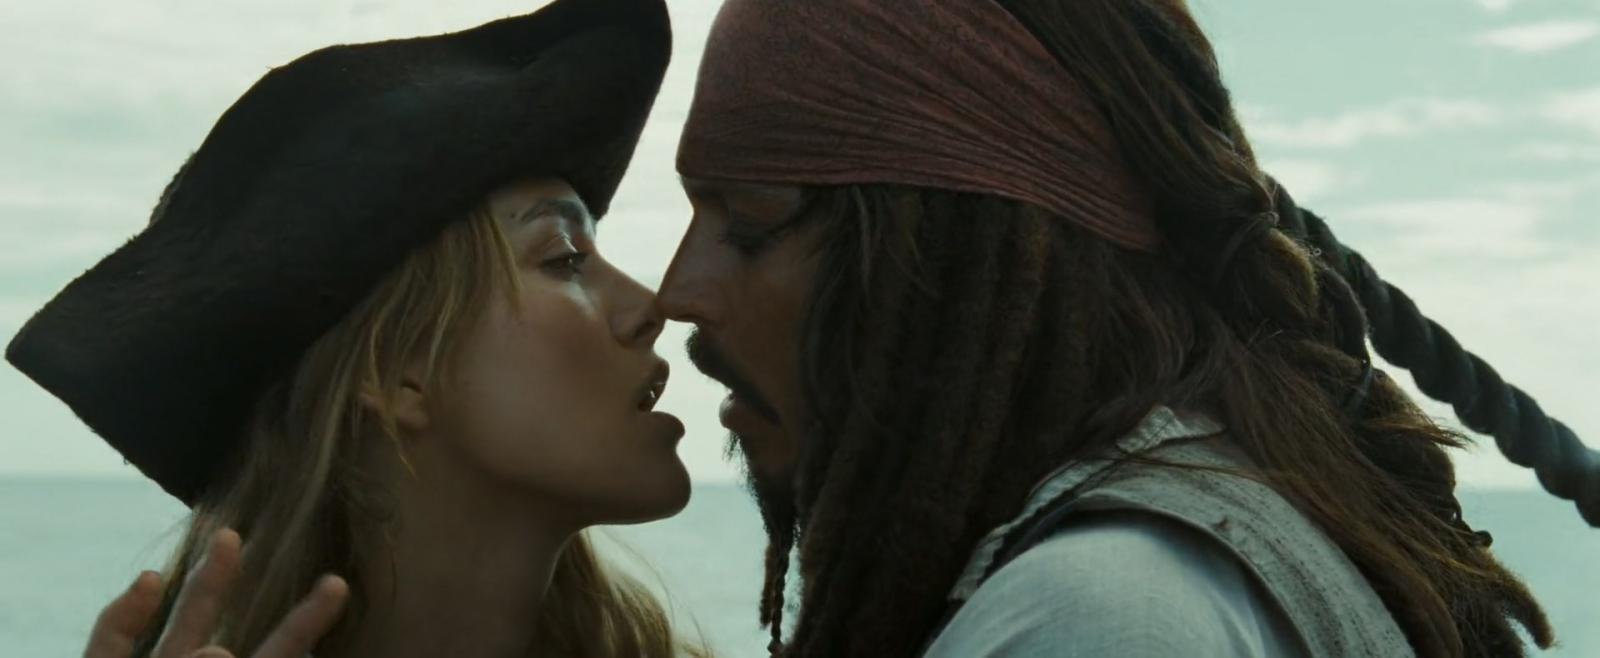 Here's How Good of a Kisser Johnny Depp Actually Is, According to Marion Cotillard - image 2